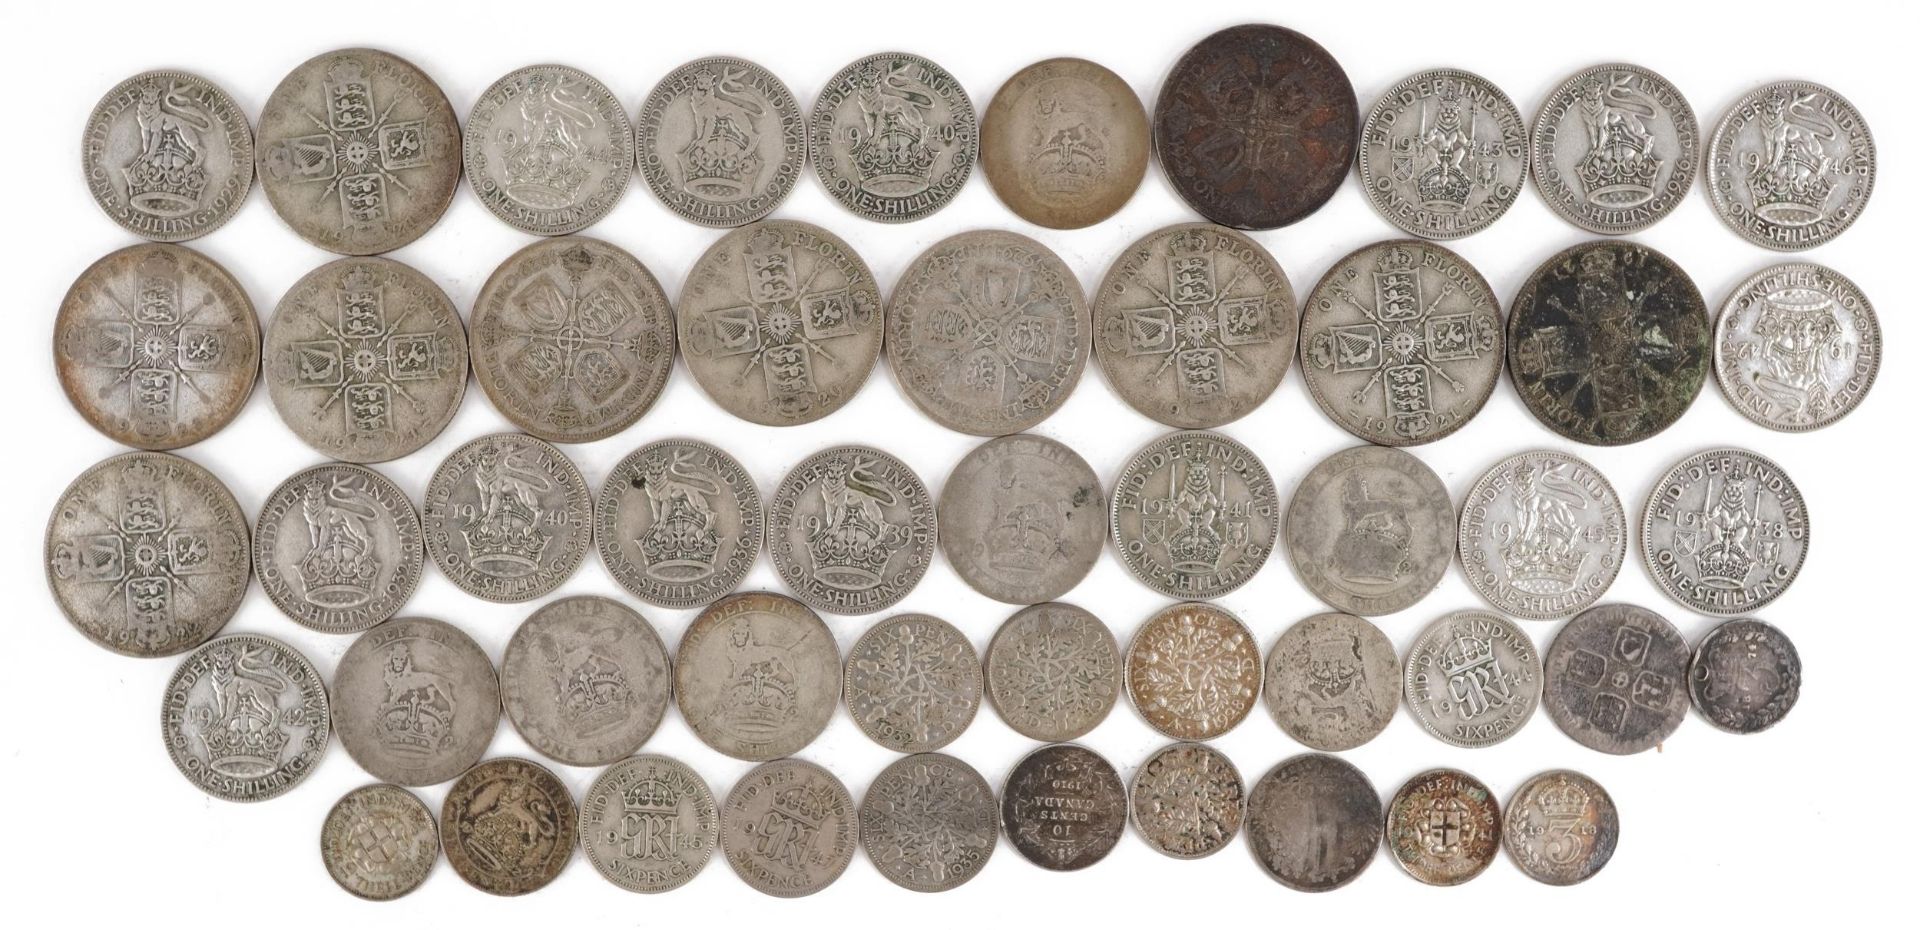 Victorian and later British coinage including florins, shillings and threepenny bits, 281g : For